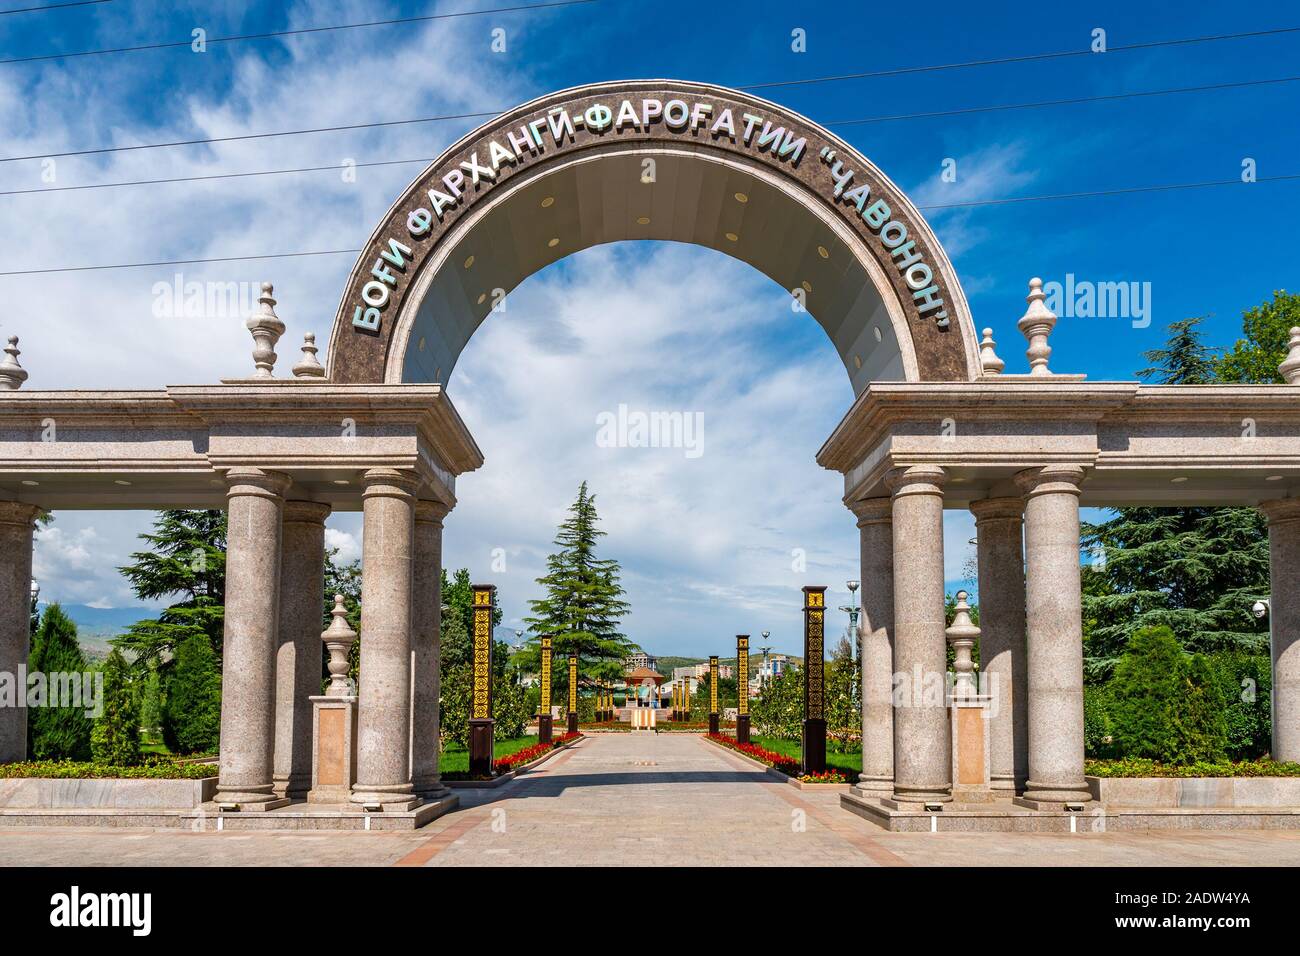 Dushanbe Youth Park Picturesque View of Entrance Gate and Pavilion with Street Lights on a Sunny Blue Sky Day Stock Photo